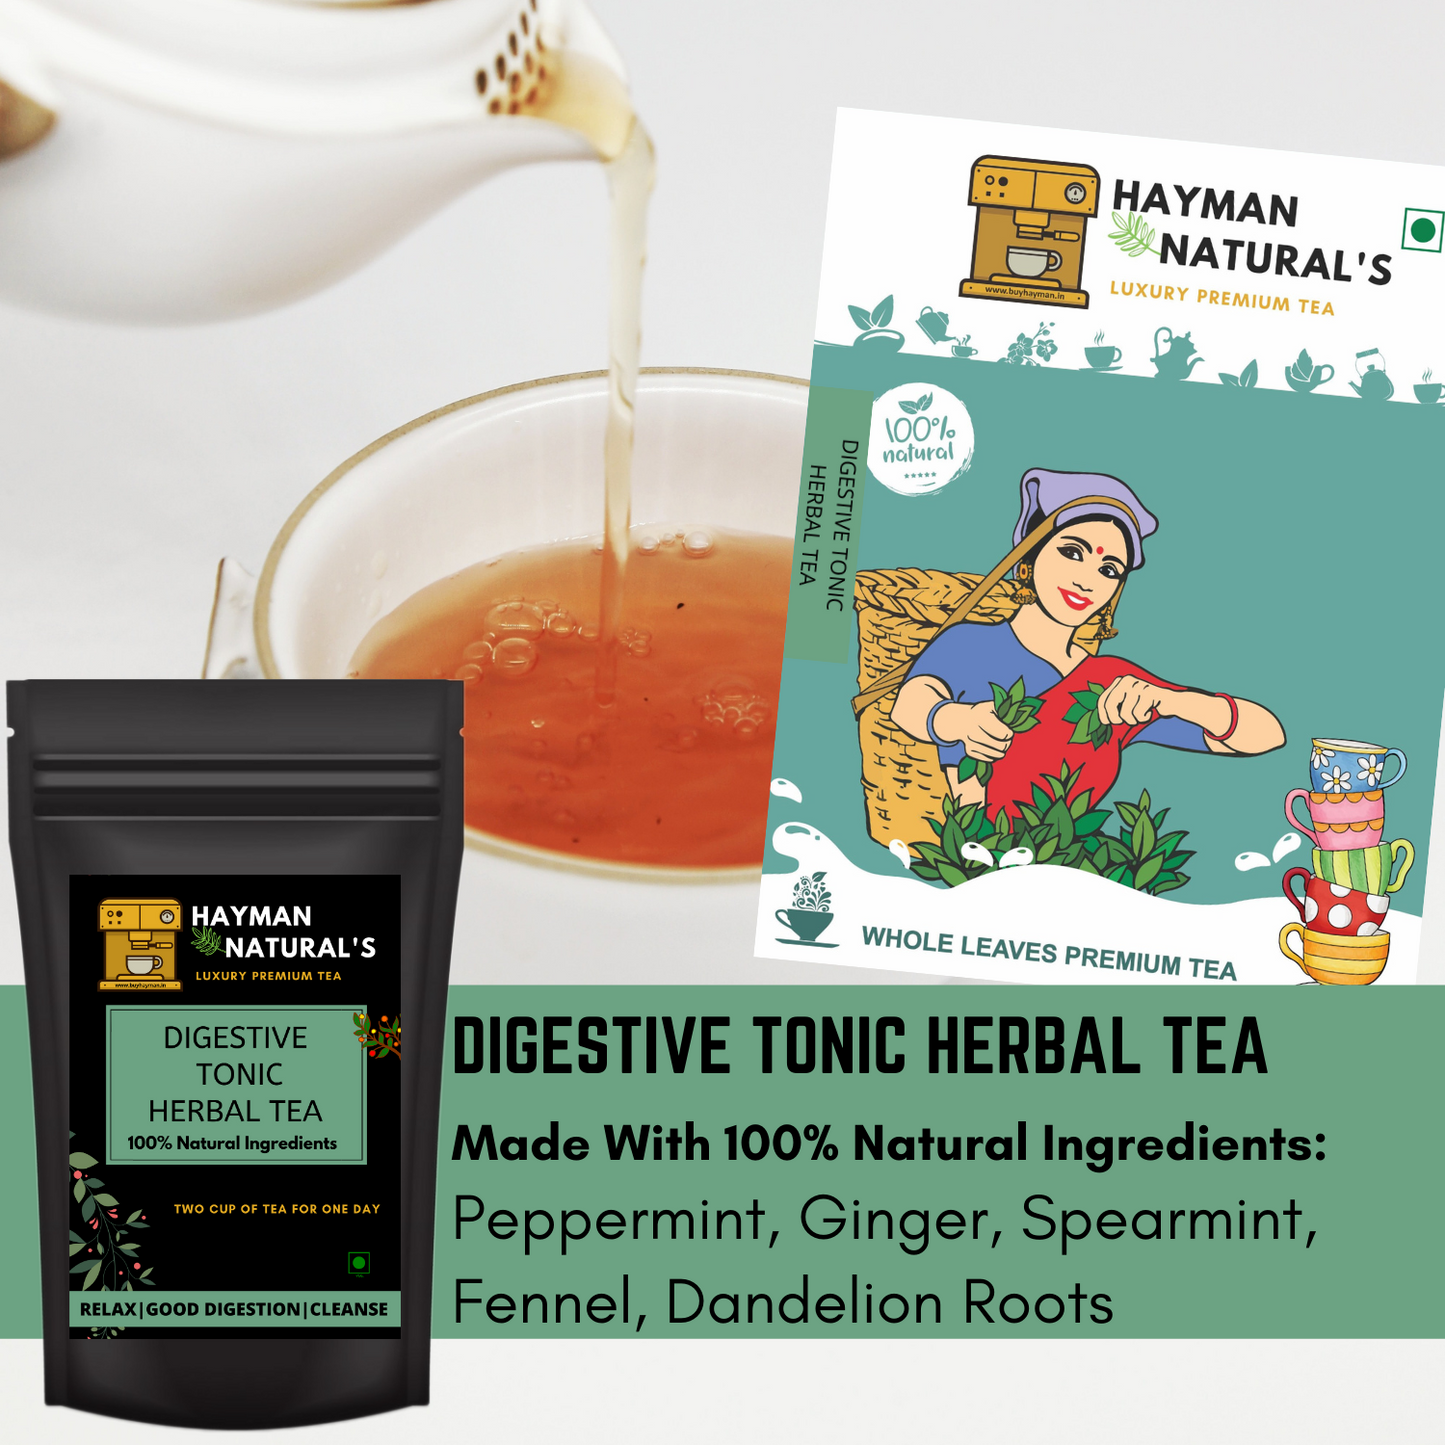 Hayman Natural's Digestive Tonic Herbal Tea-Relaxes Stomach, Reduces Gas